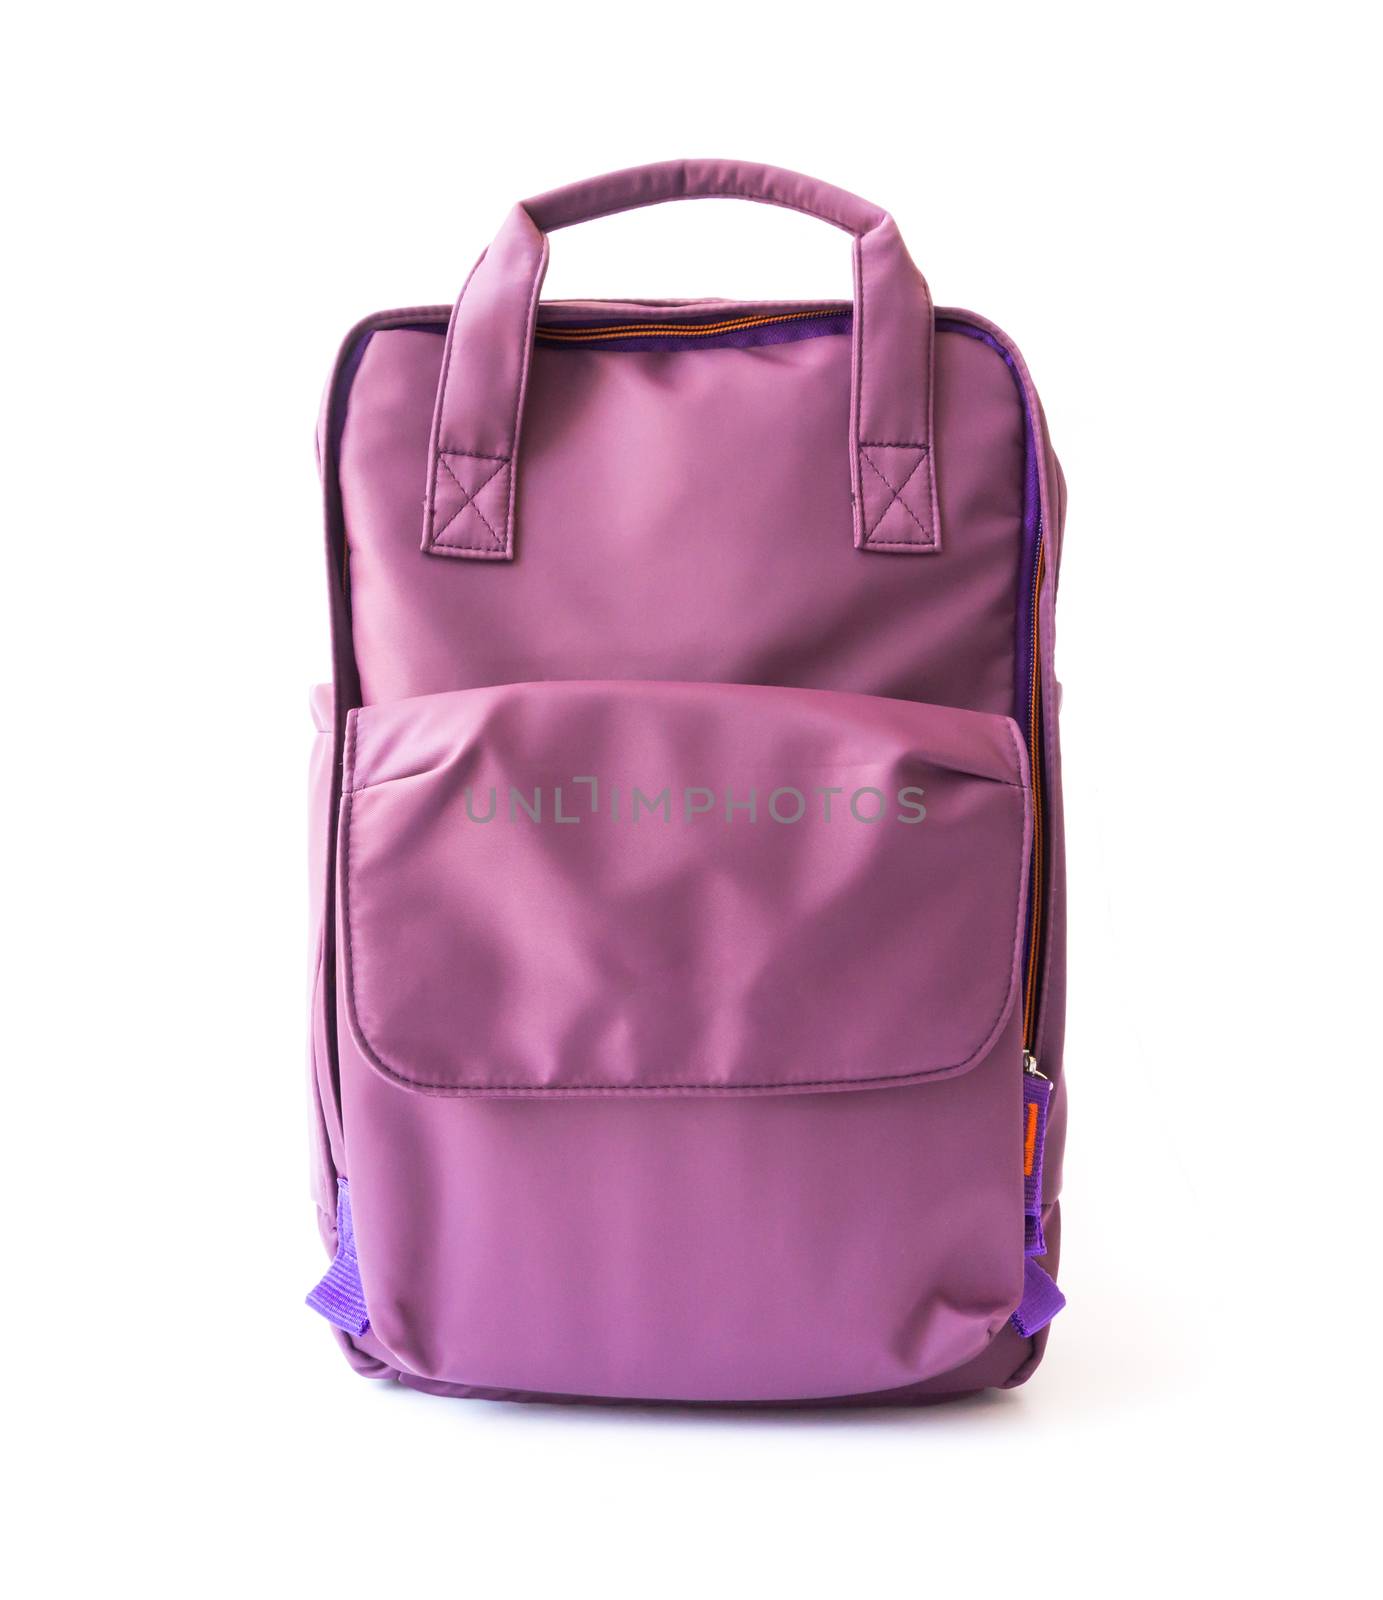 Purple backpack on white background for school or touris travele by pt.pongsak@gmail.com